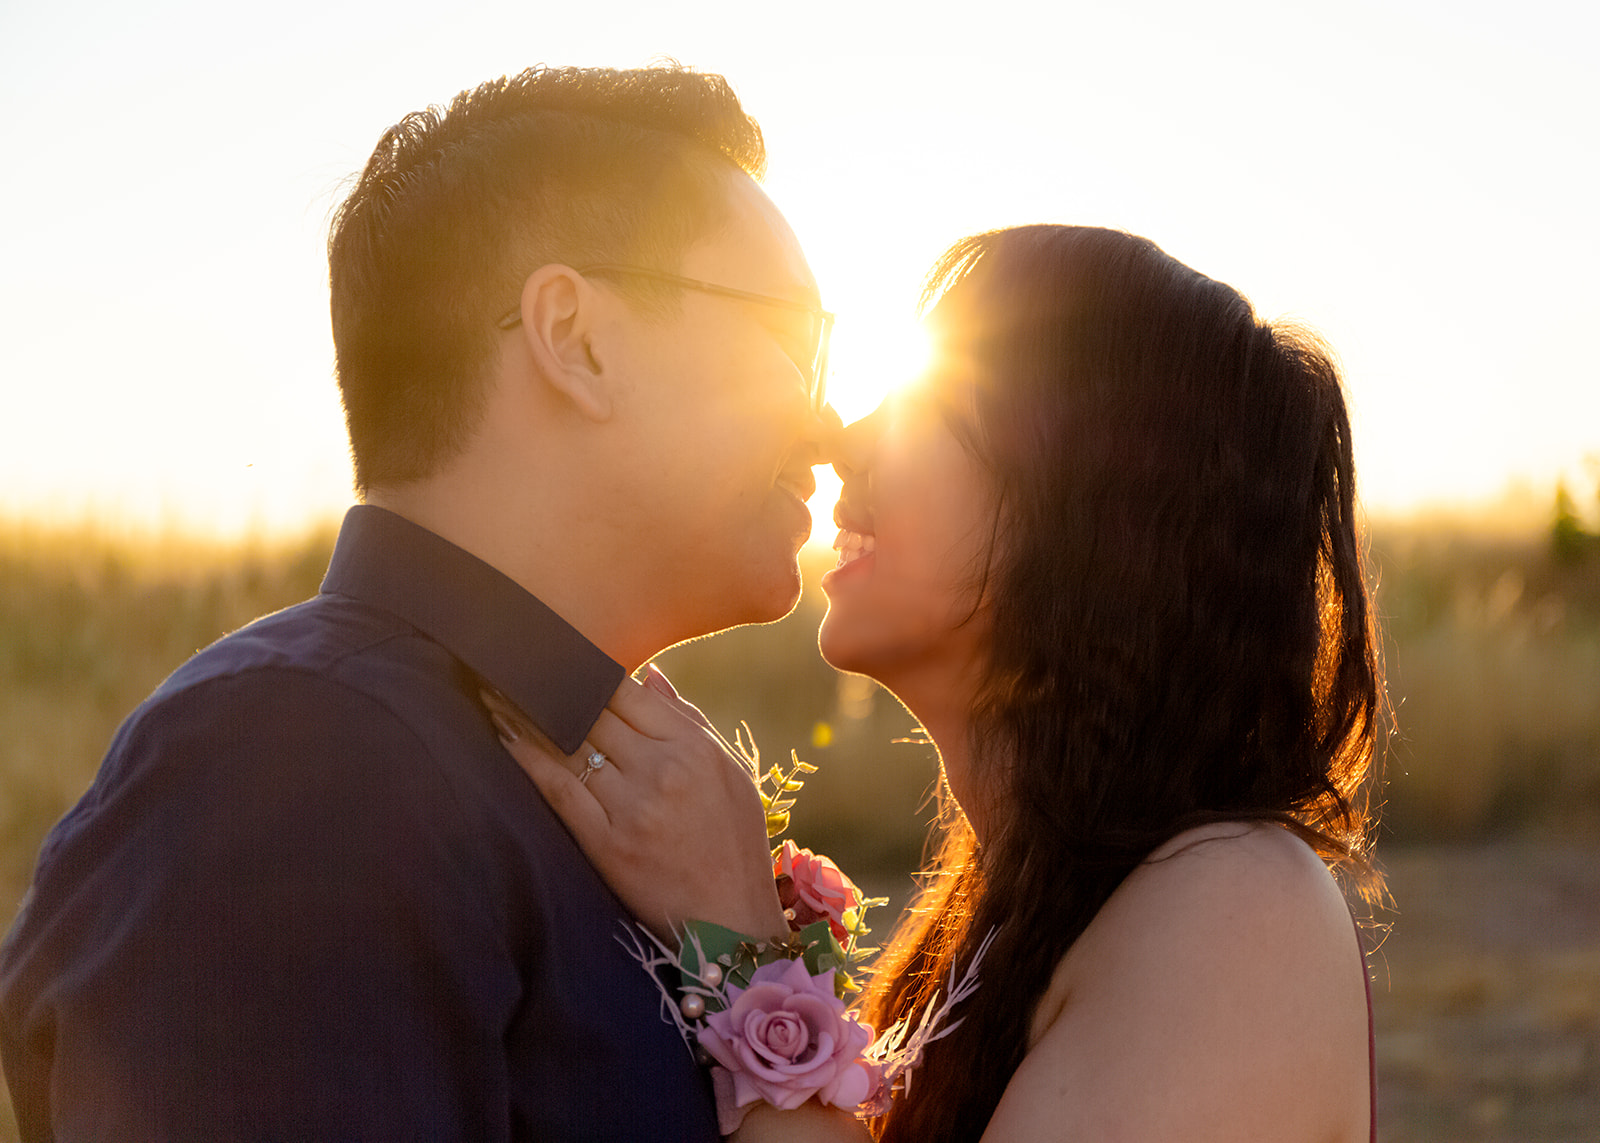 nonbinary person and their girlfriend kissing with sun shining between them at sunrise